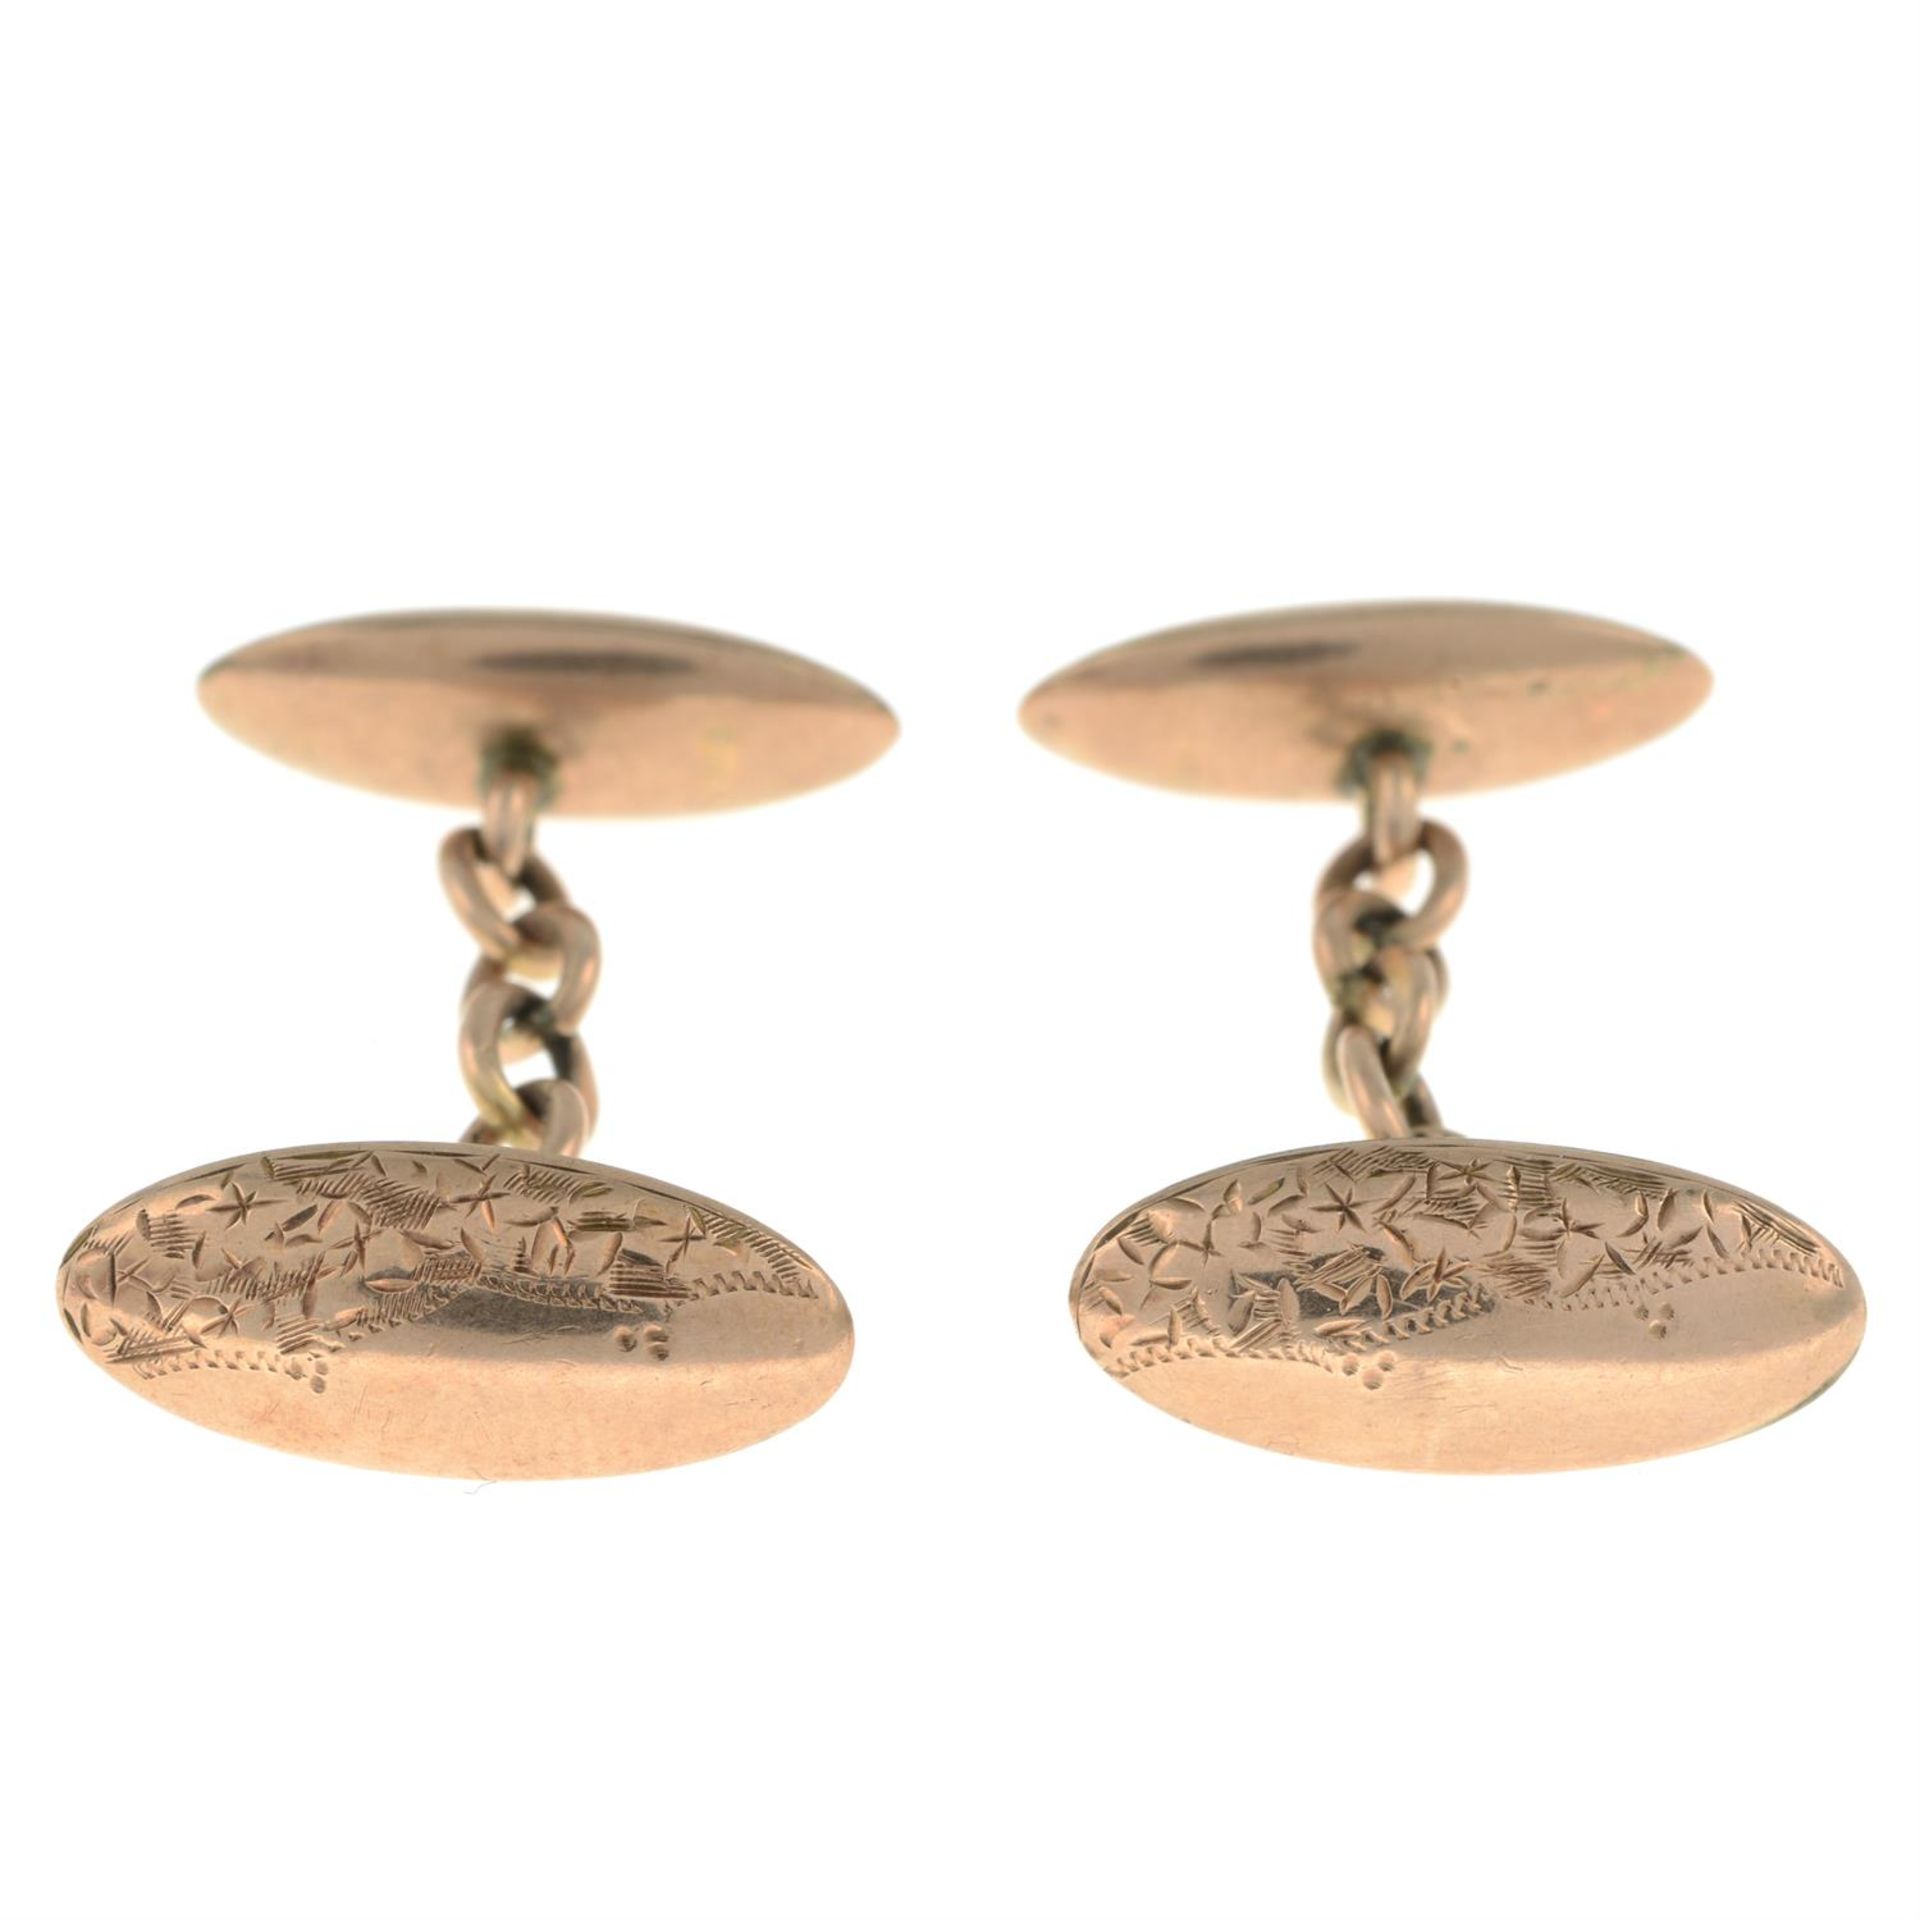 Early 20th century 9ct gold cufflinks - Image 2 of 2